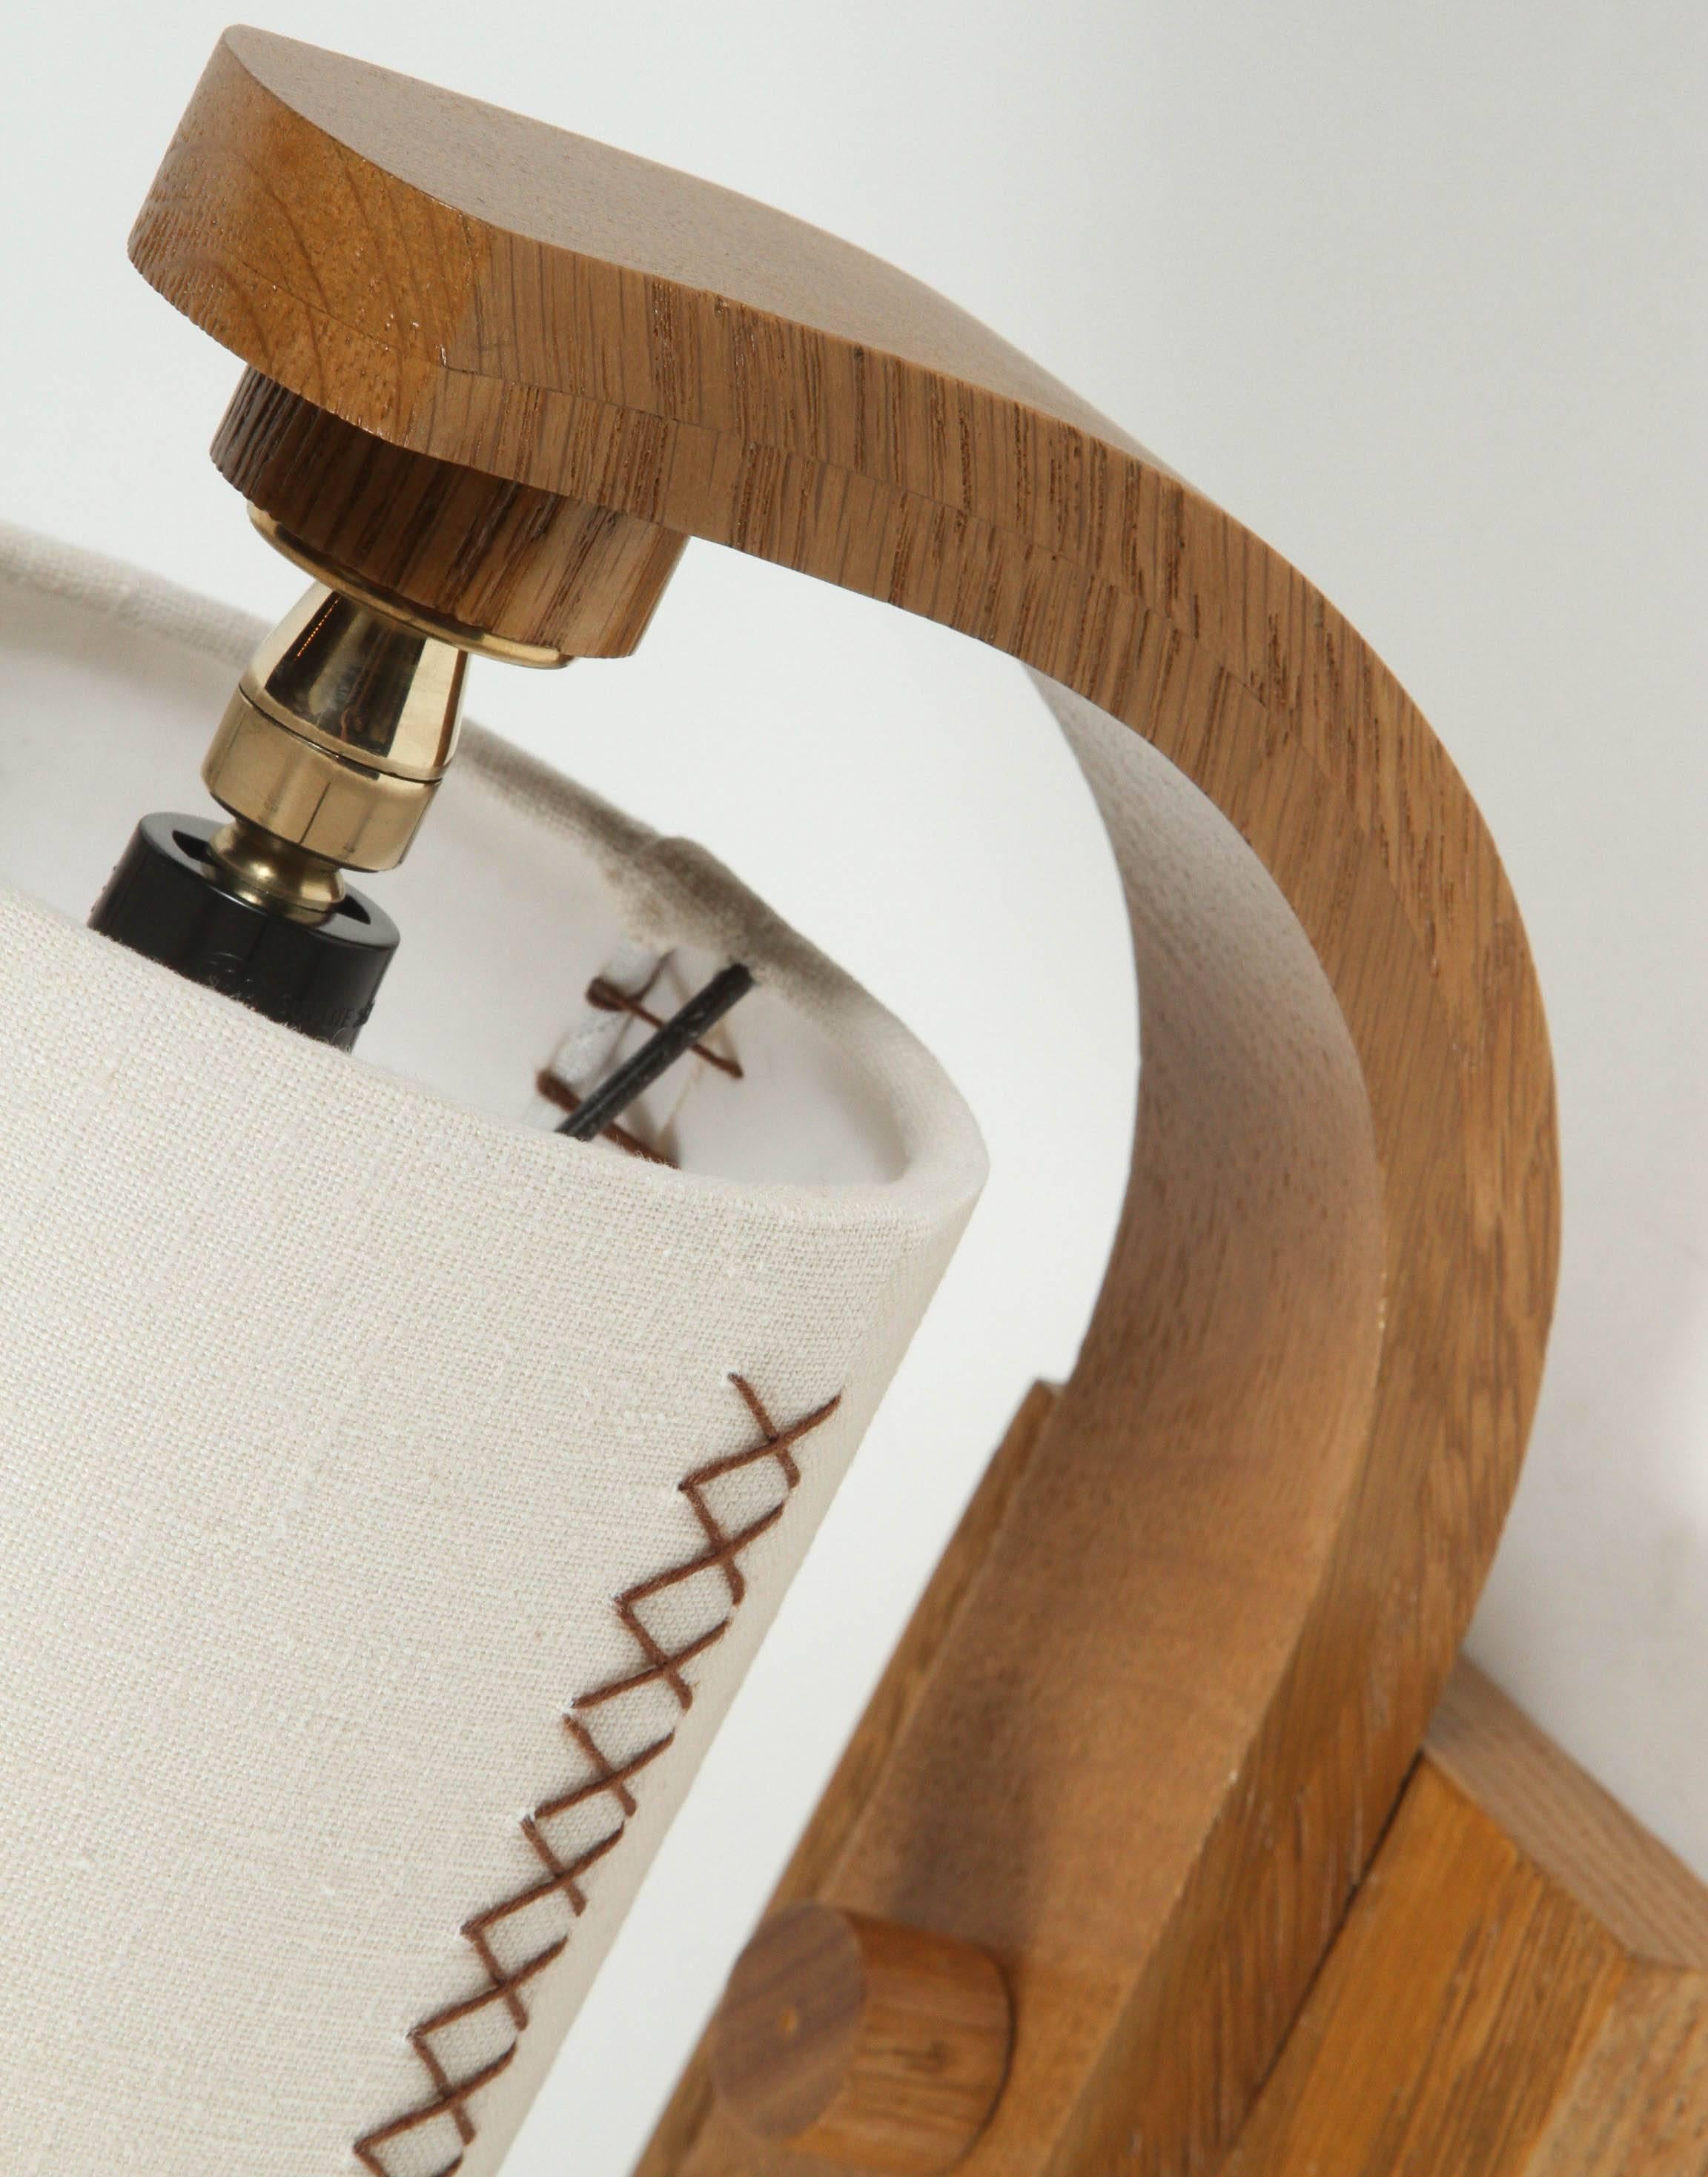 Stained Paul Marra Oak Sconce with Hand-Stitched Linen Shade